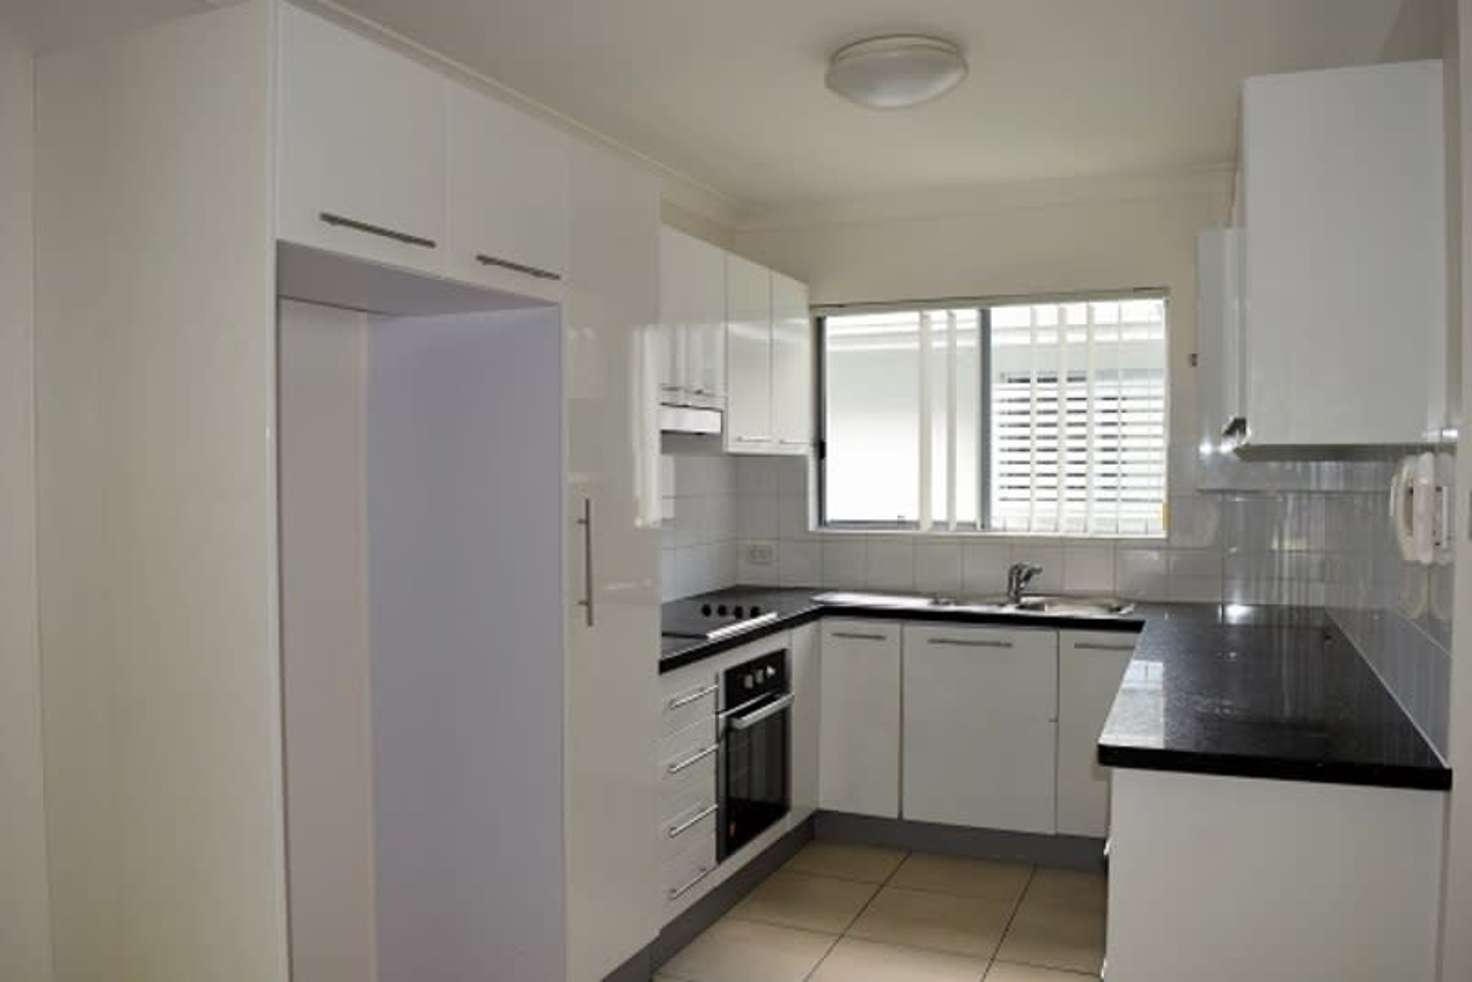 Main view of Homely apartment listing, 22a Keats St, Moorooka QLD 4105